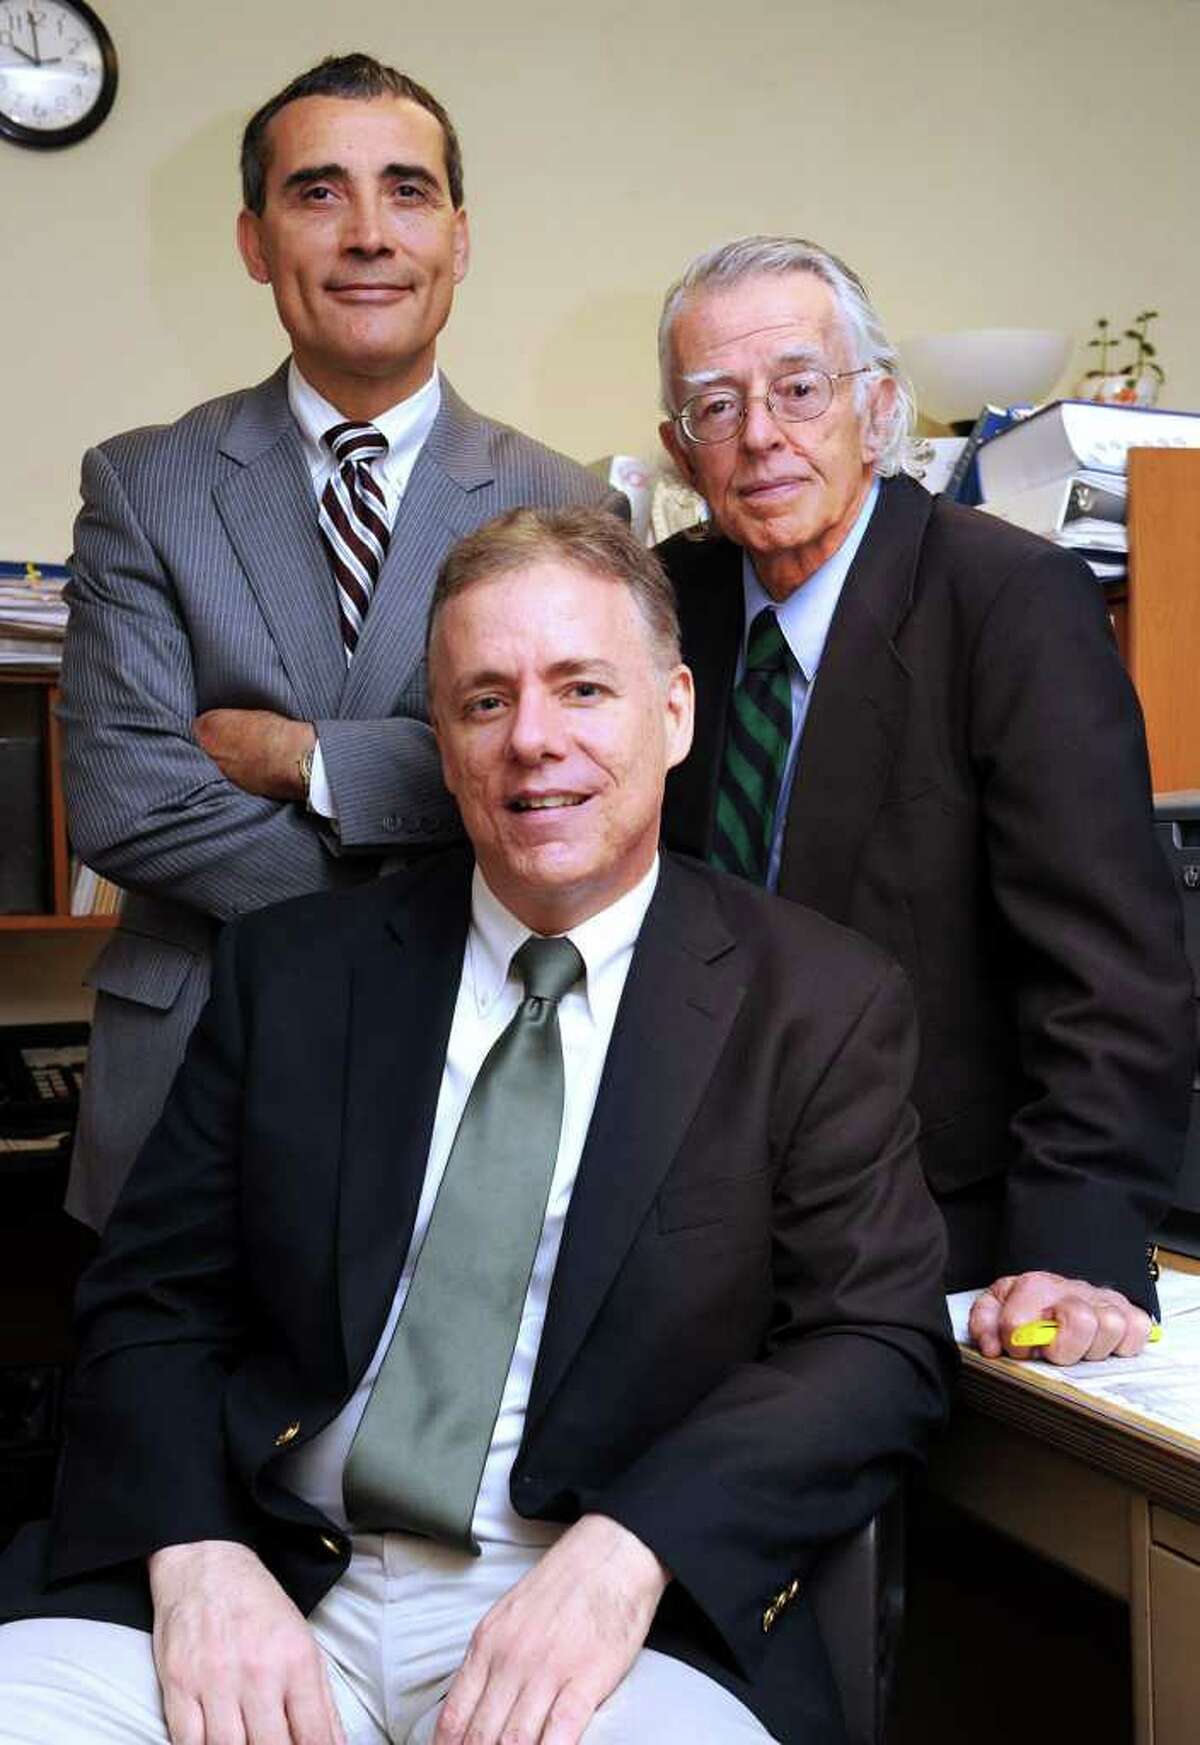 Court interpreters and translaters at the Danbury Superior Court are from left, Javier Lillo, 50, of Danbury, John Lombardi, 46, of Danbury and Jose Werneck, 74, of Bristol. Photo taken Wednesday, May 18, 2011.